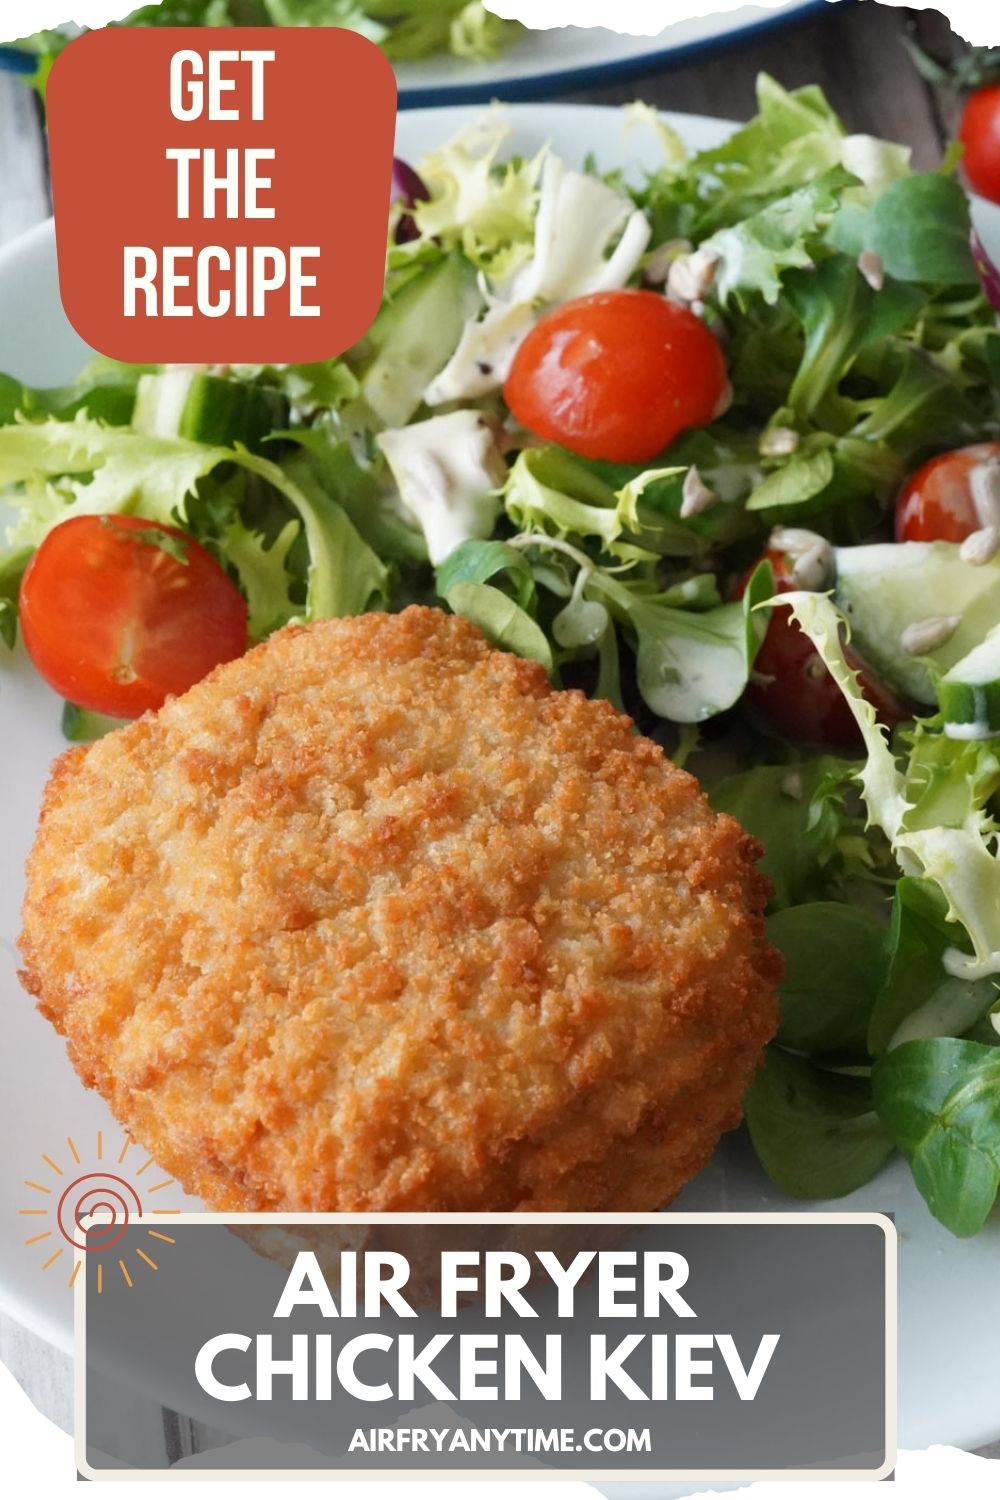 Chicken Kiev on a plate with salad